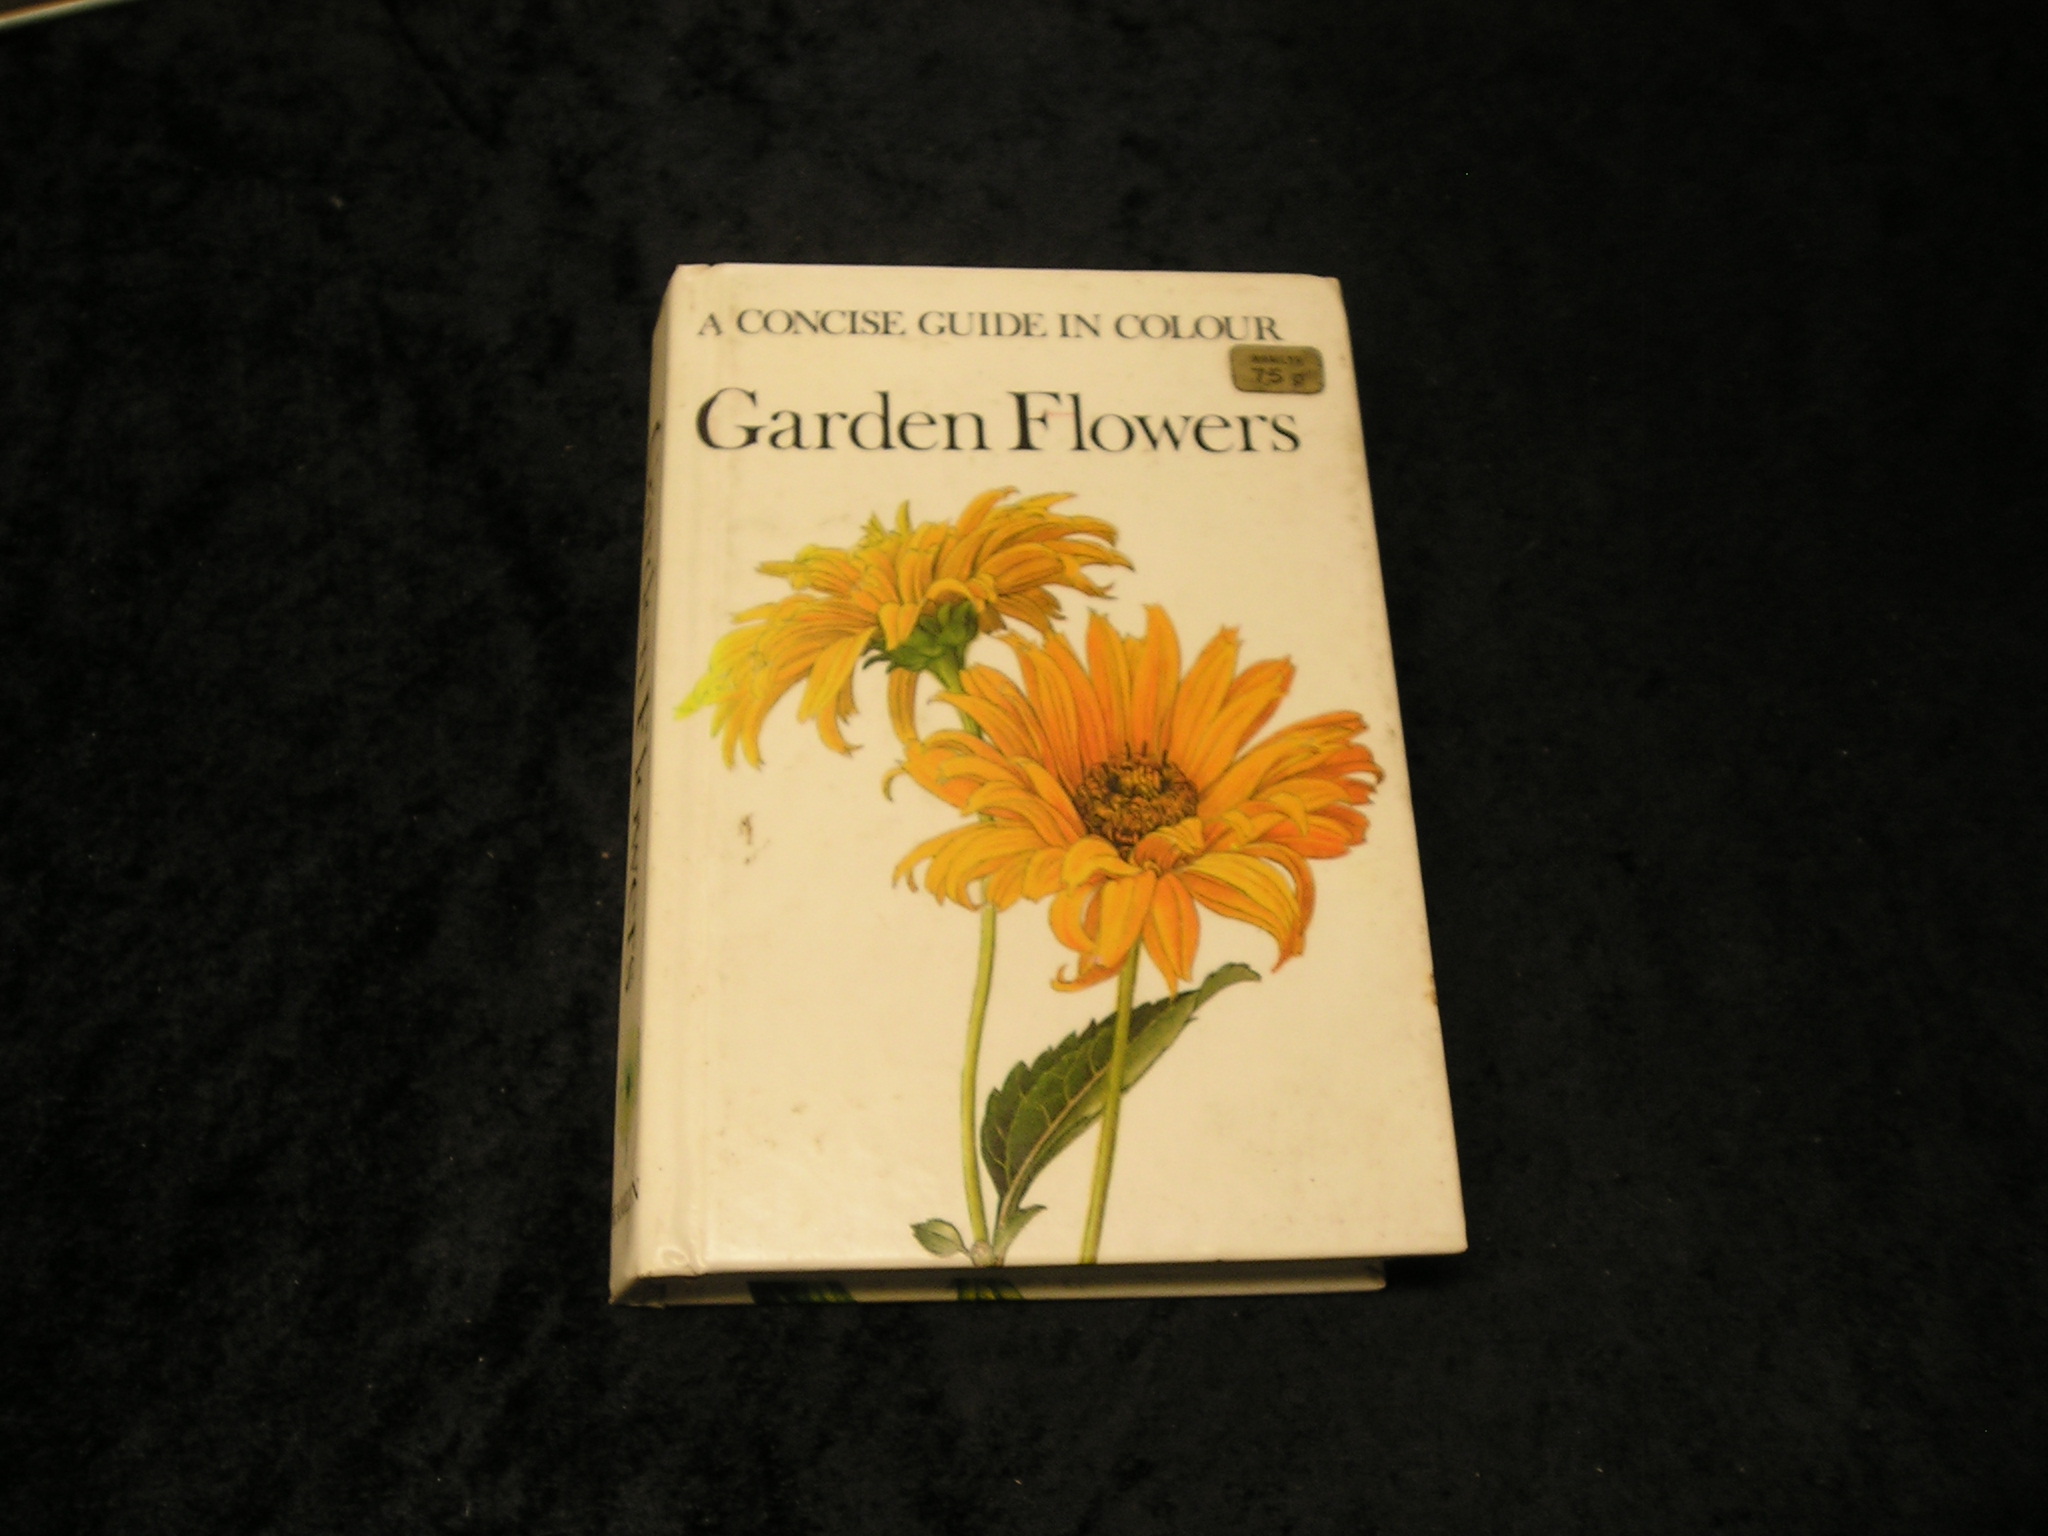 A Concise Guide in Colour Garden Flowers